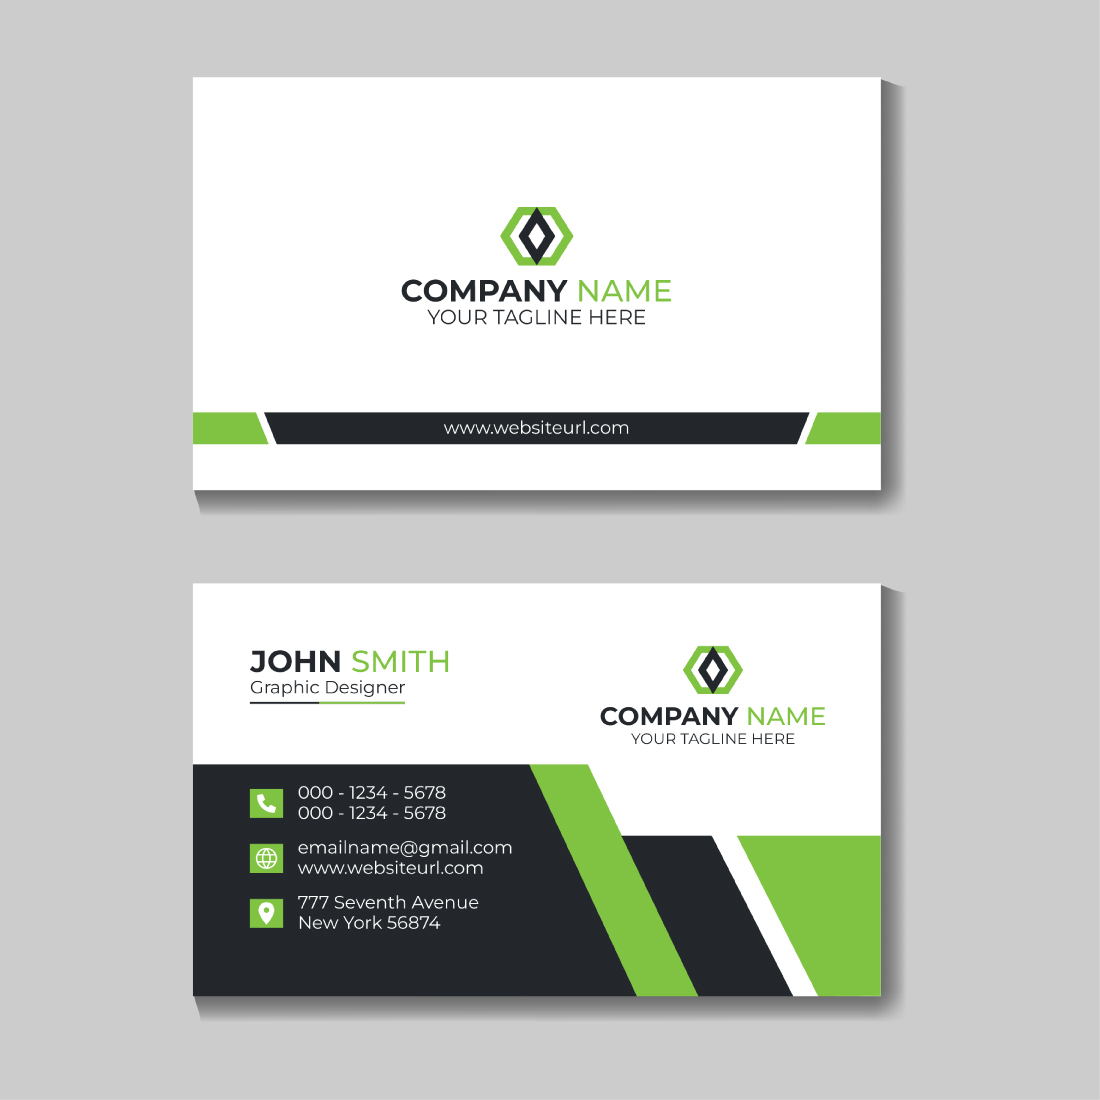 green color Corporate Professional Creative Clean Business Card Design Template with 4 Colors.